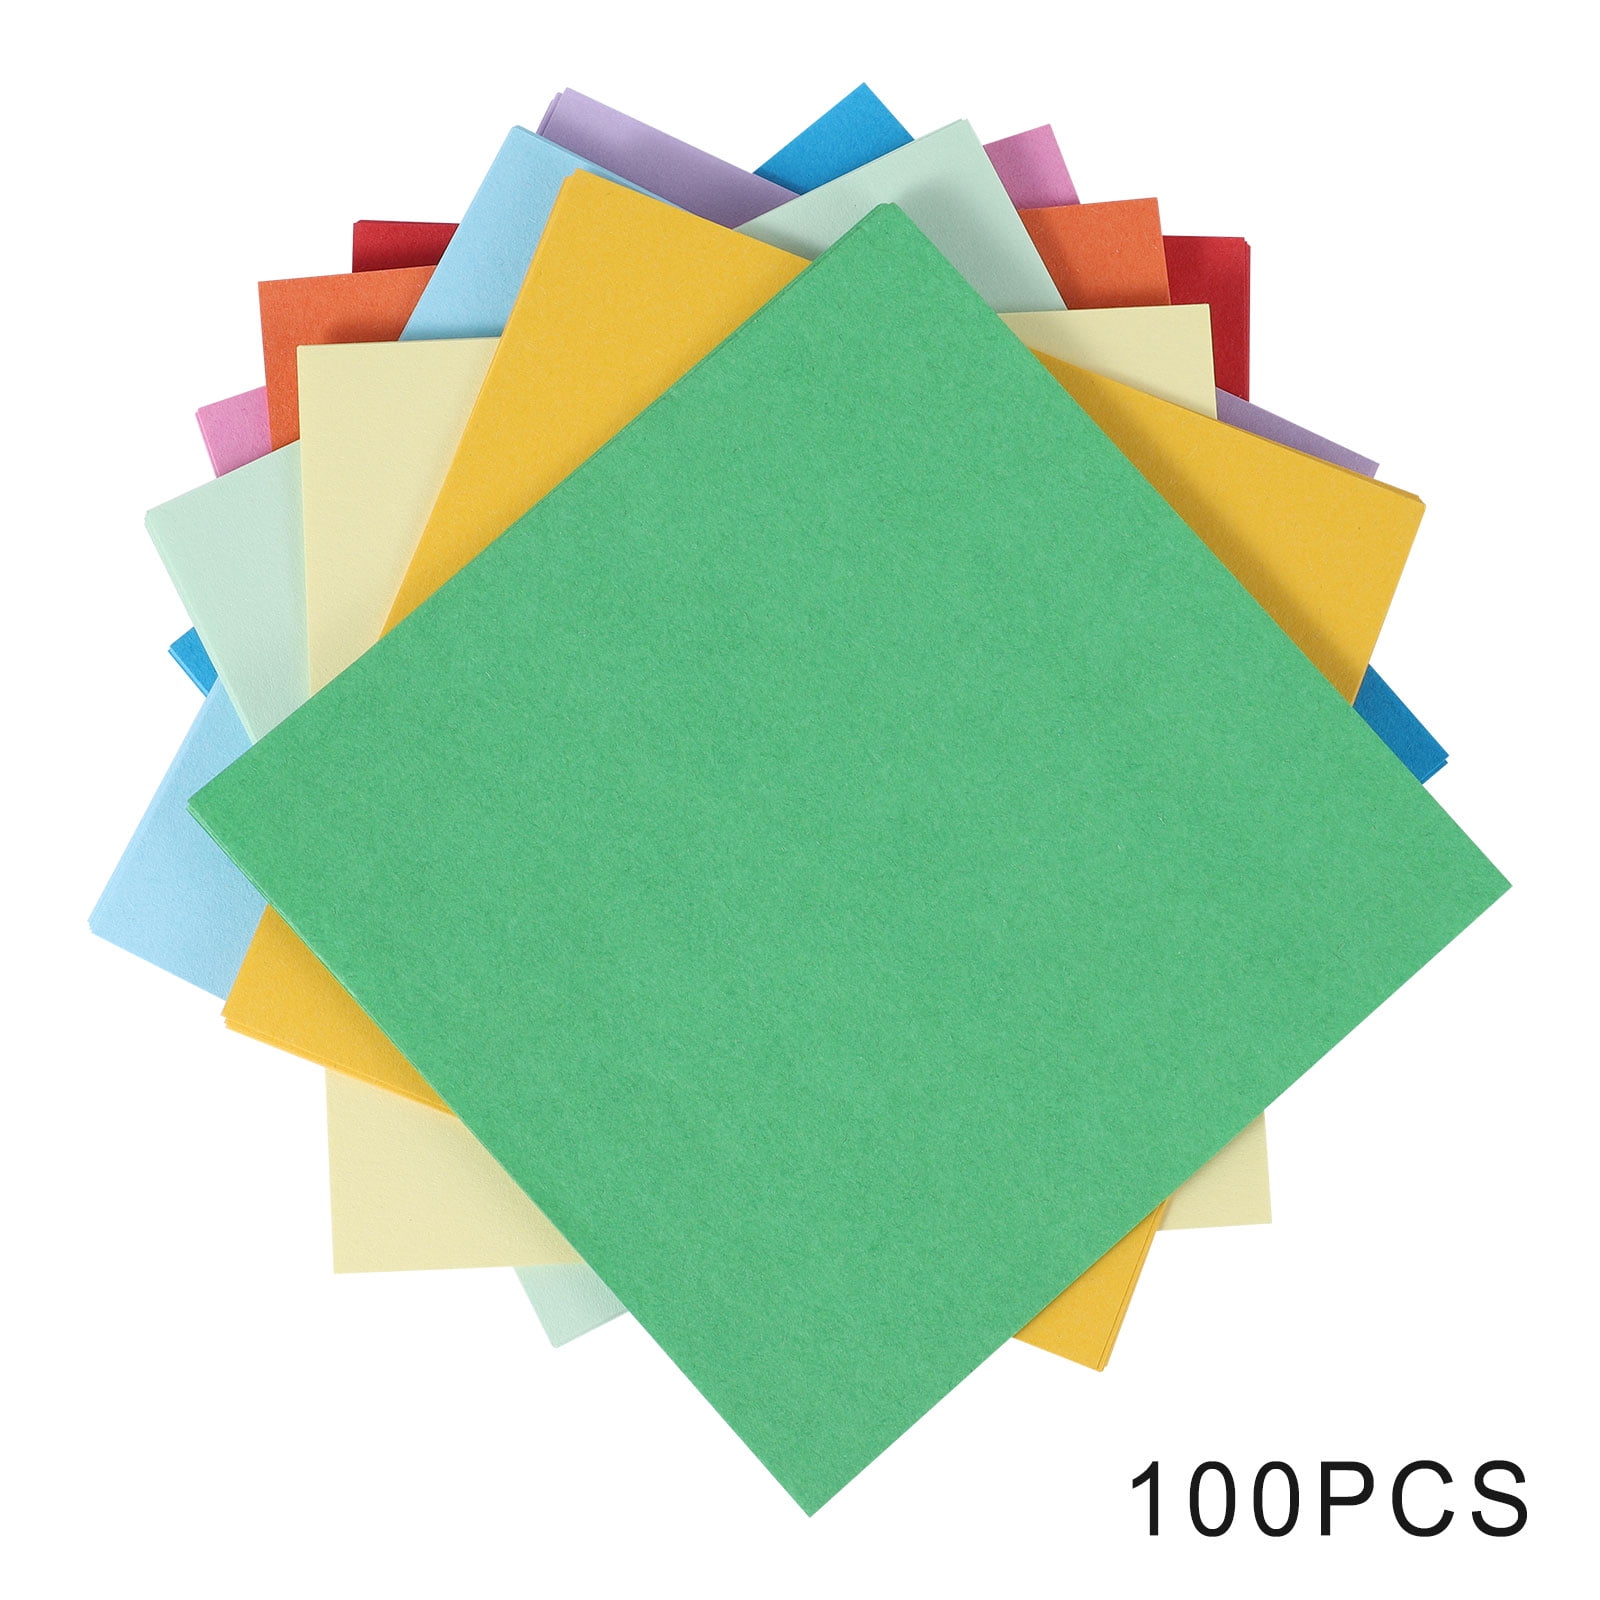 A4 ACTIVITY PAD Multicoloured Crafts/Drawing/Origami 80 Paper Sheets/Stationery 